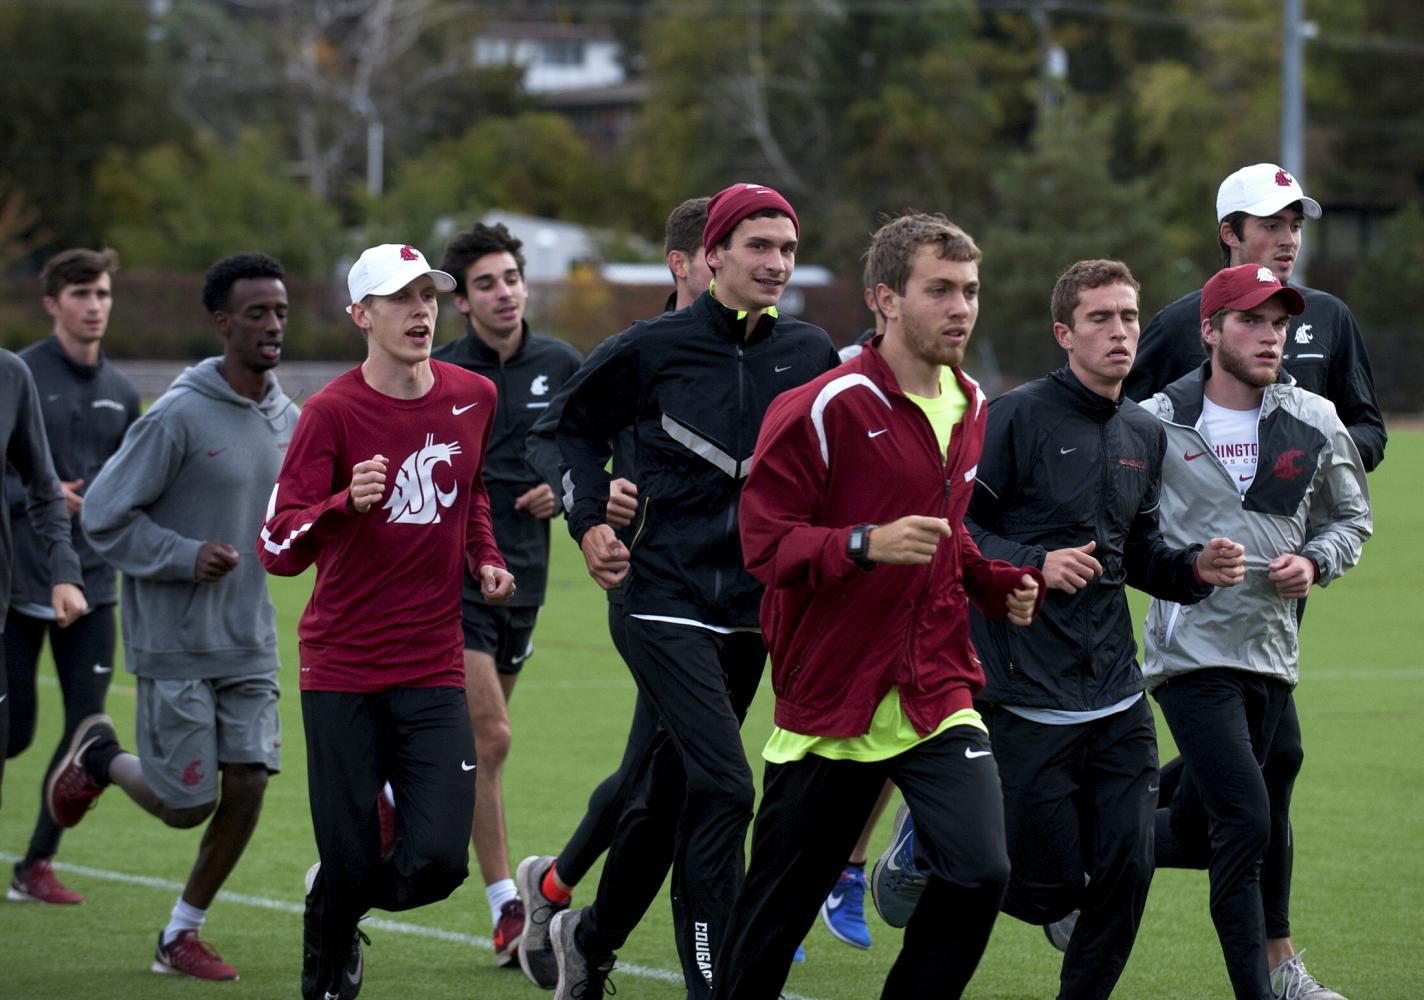 Athletes on the WSU Cross Country team warm up during a practice on October, 10 2016.